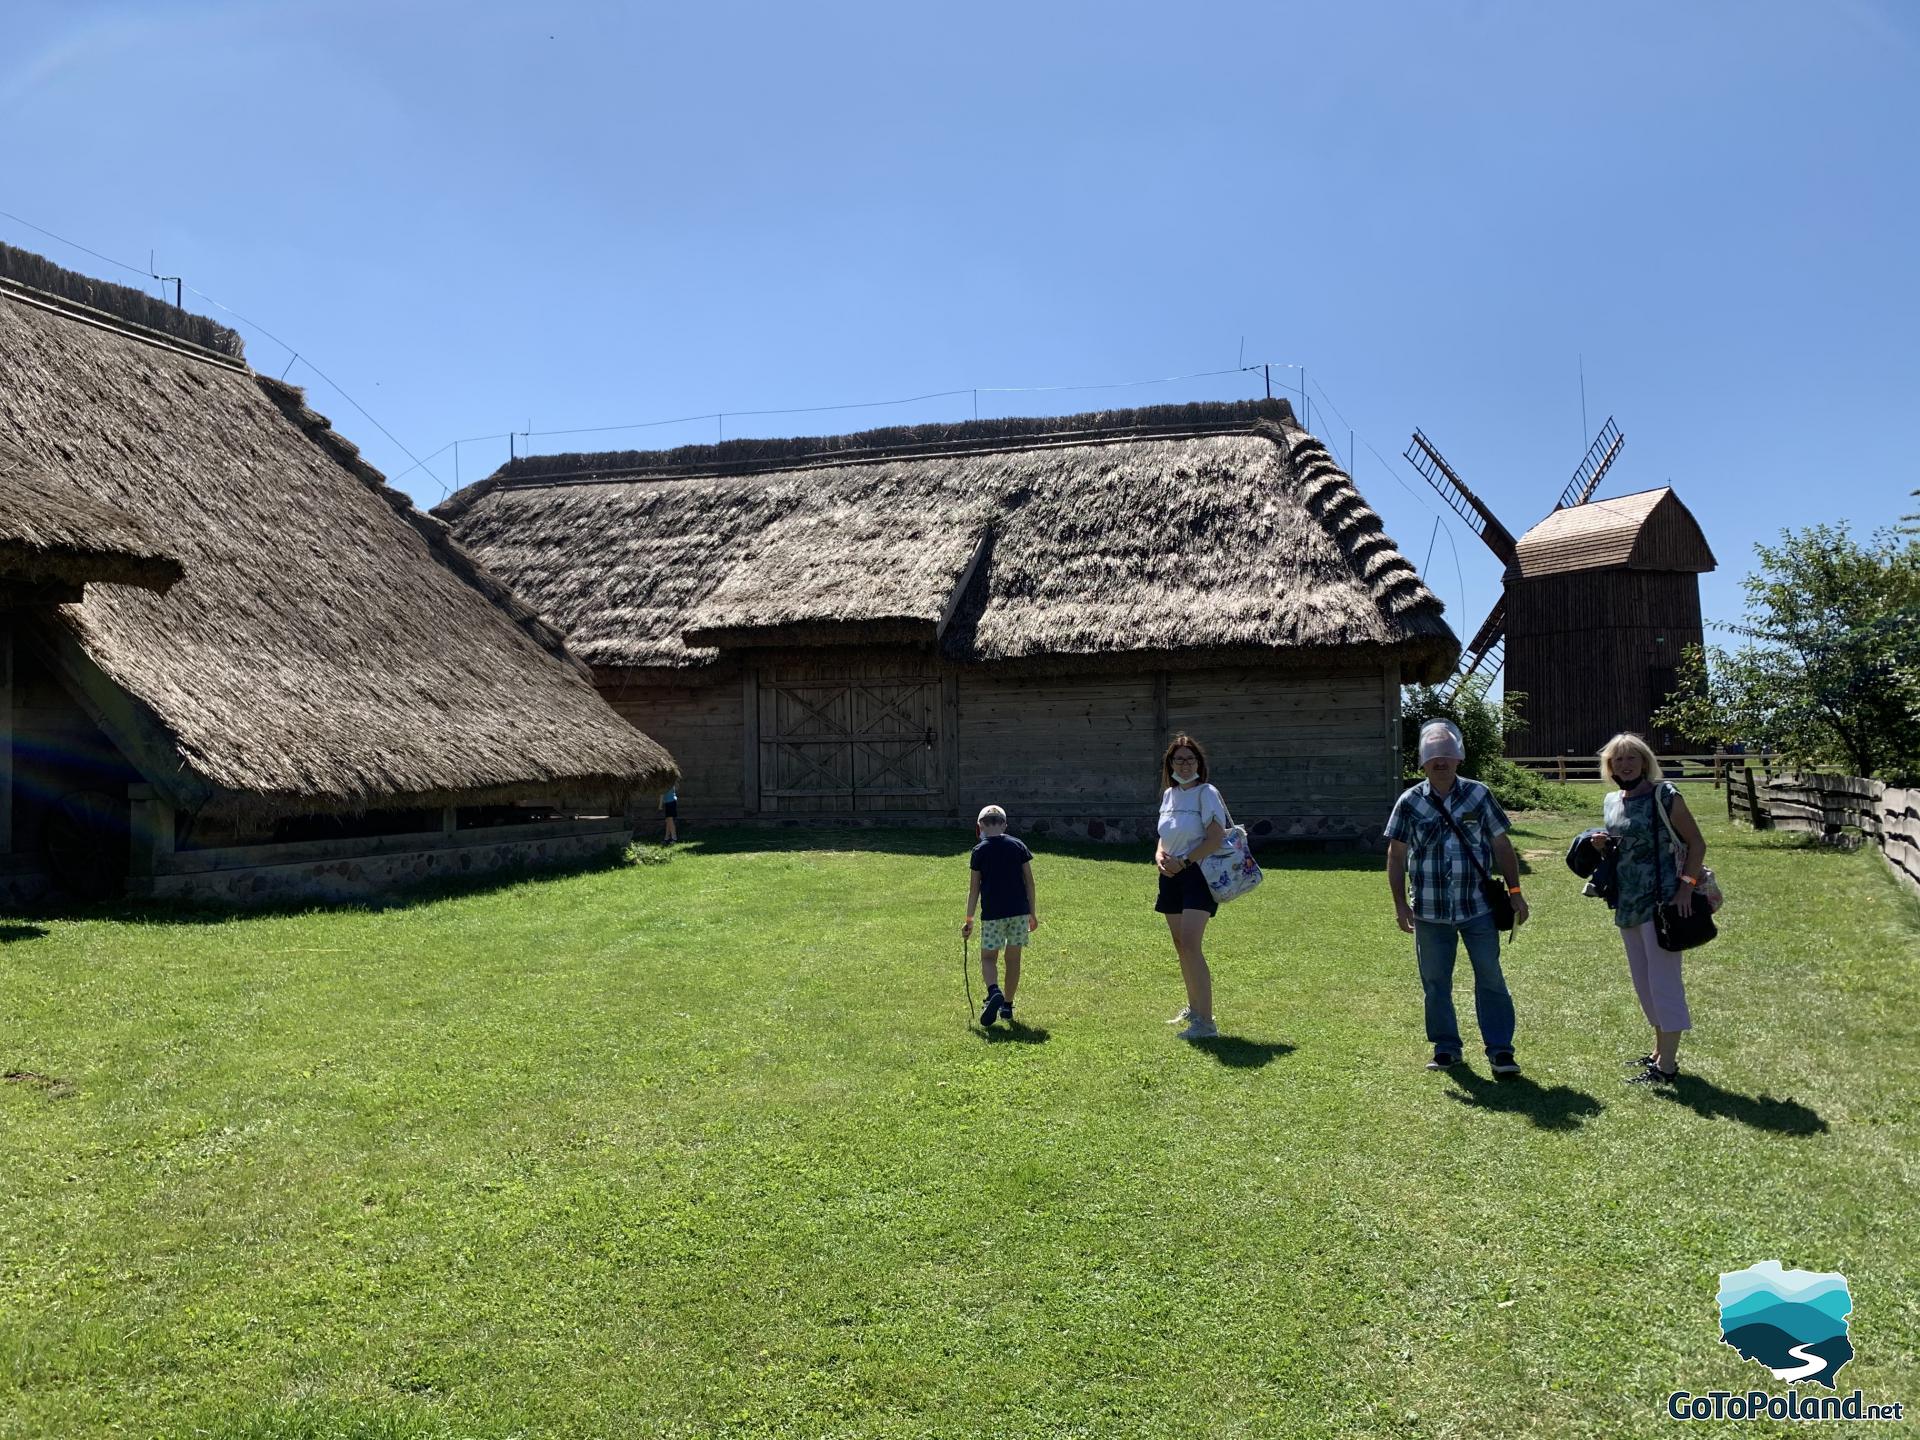 a landscape with peasant huts and a windmill in the background, the family is standing in the middle of a lawn